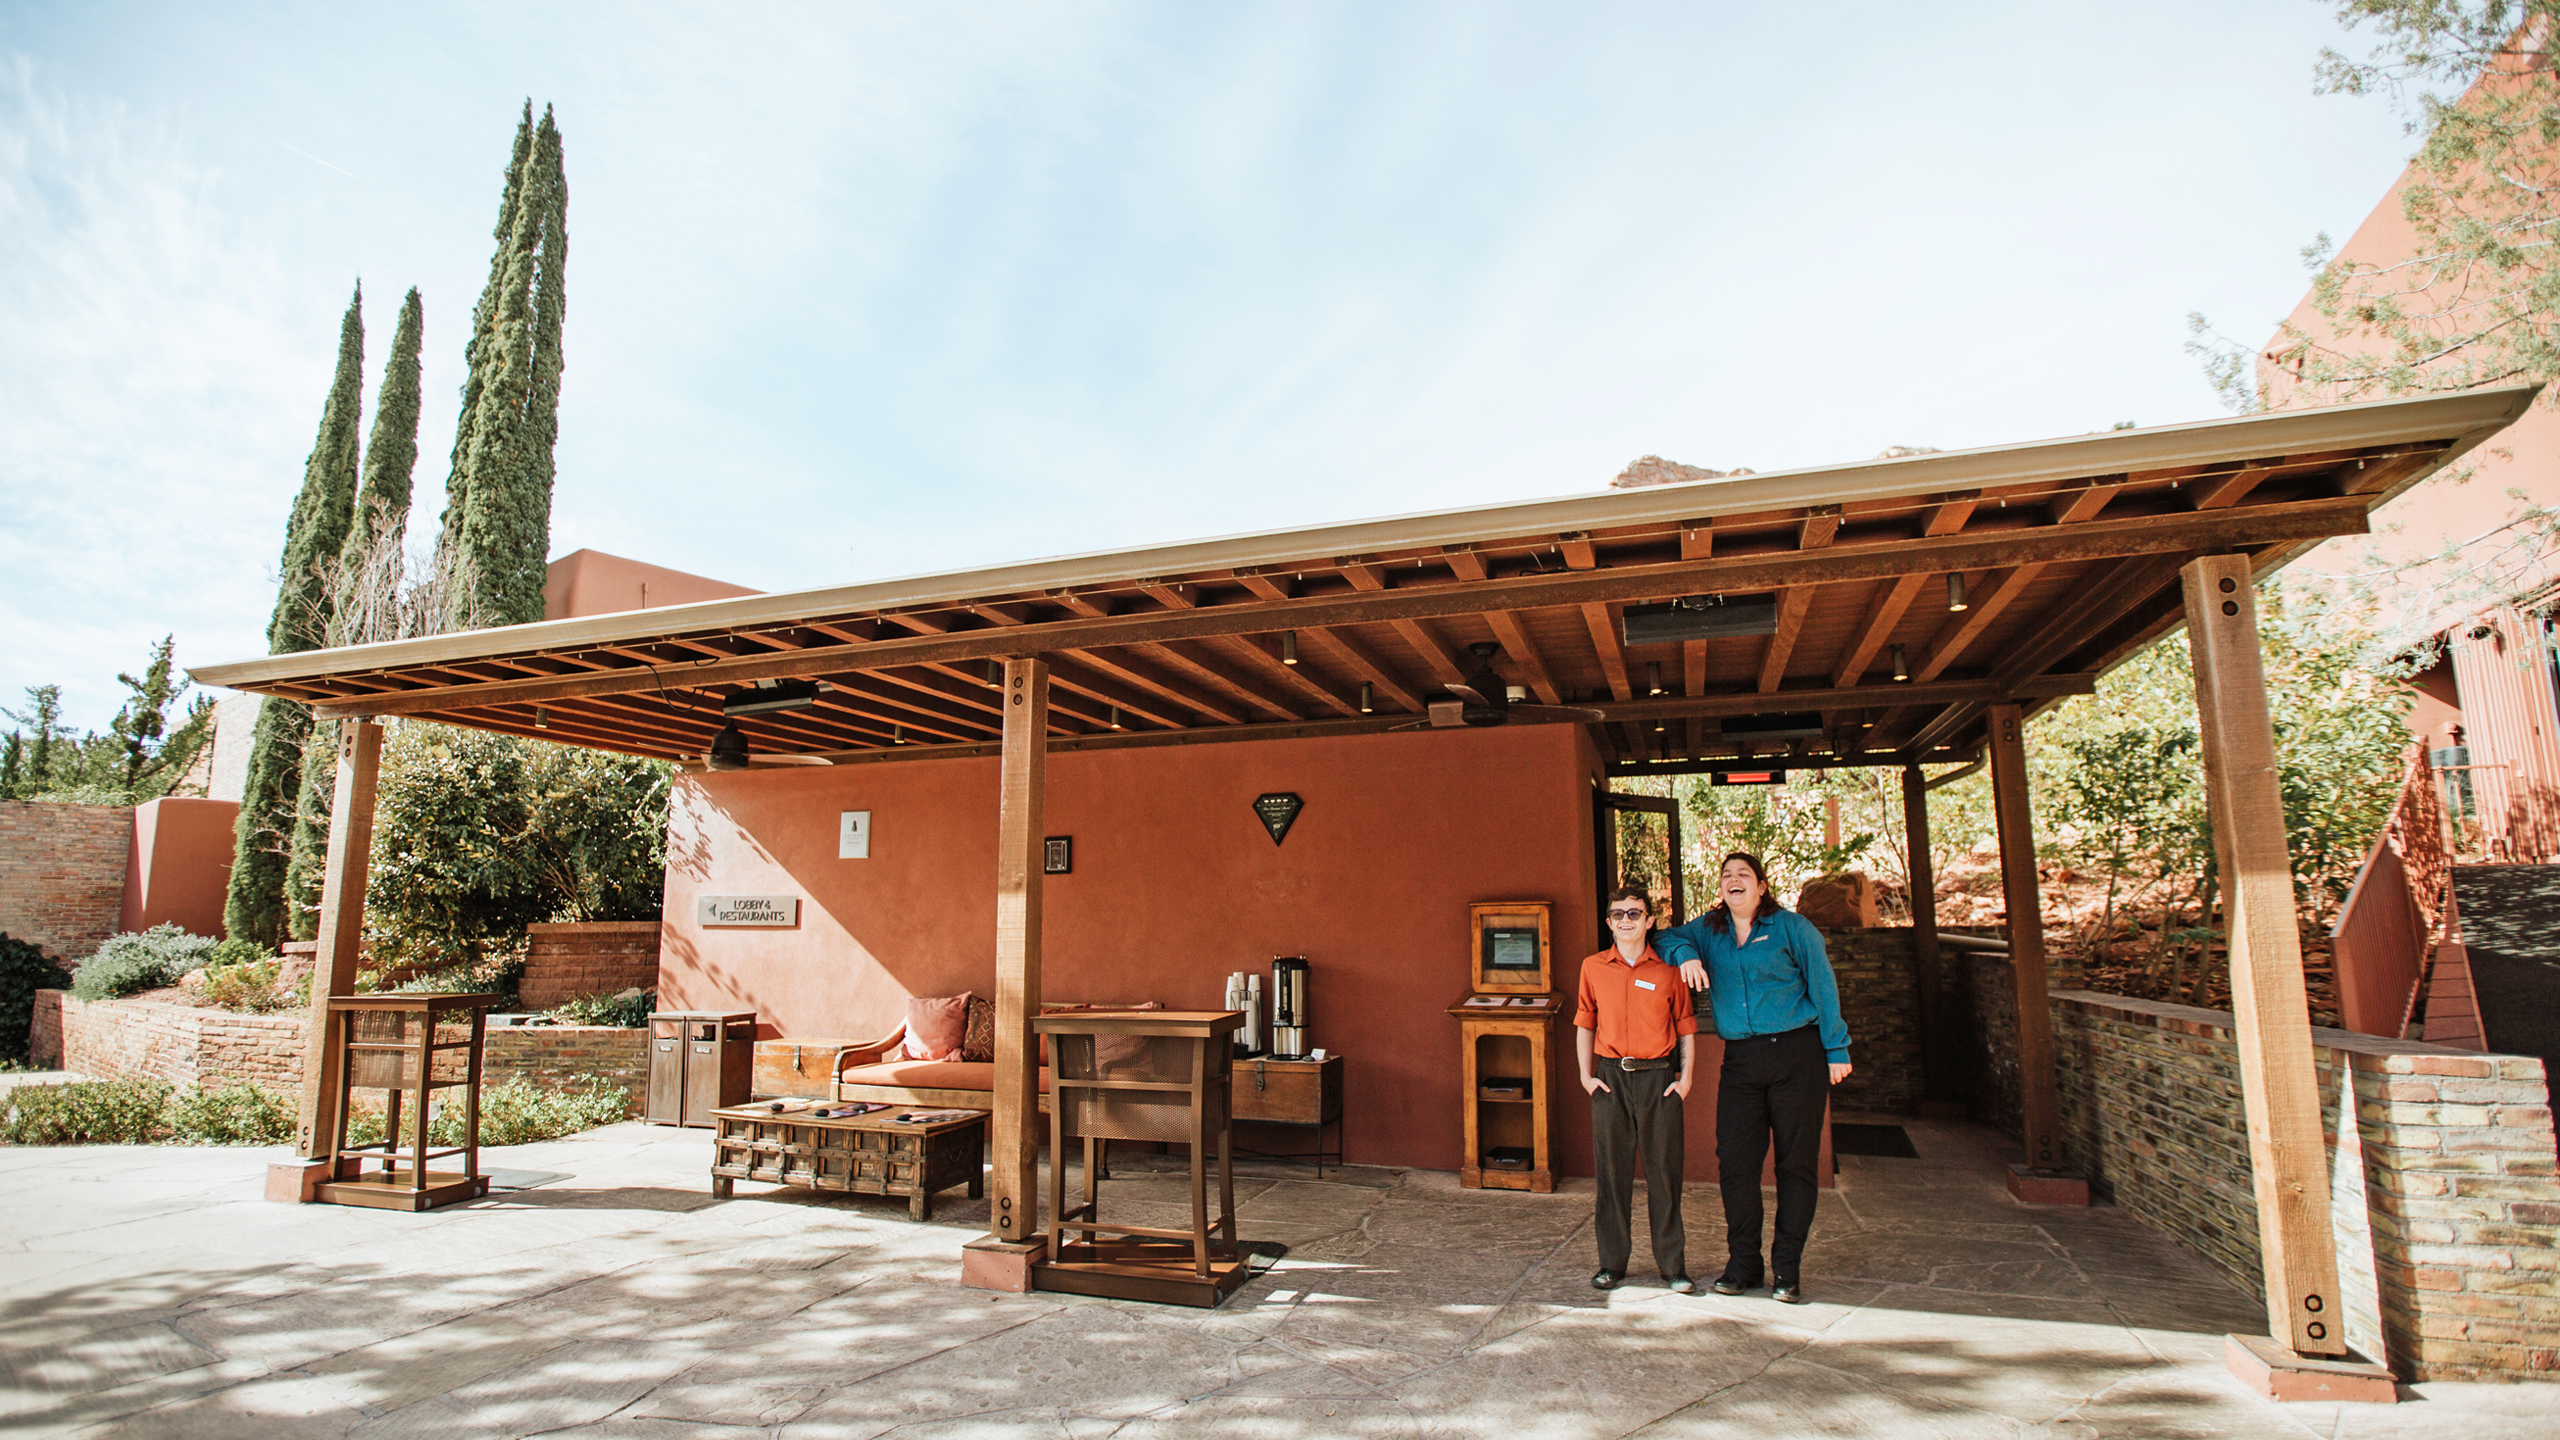 Two resort employees standing outside an adobe building laughing and smiling